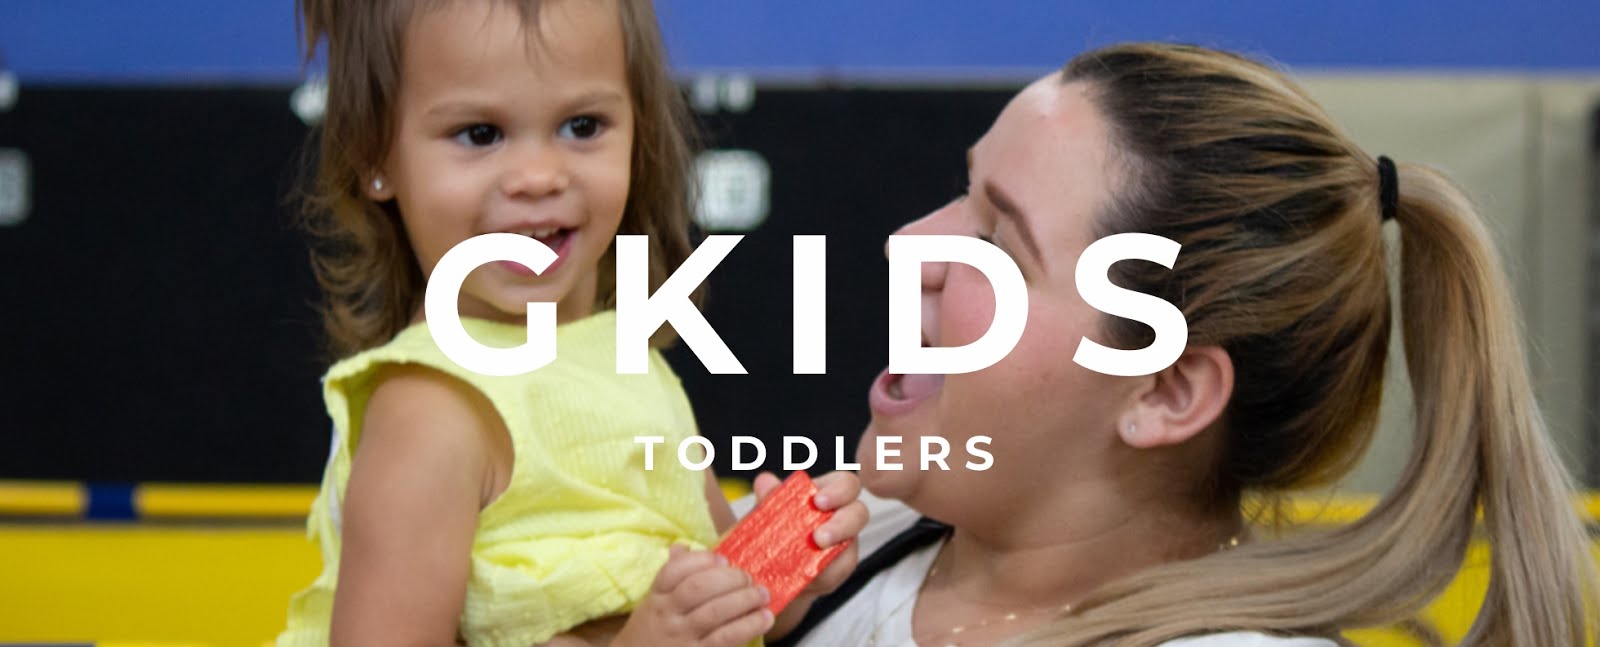 GKids Toddlers